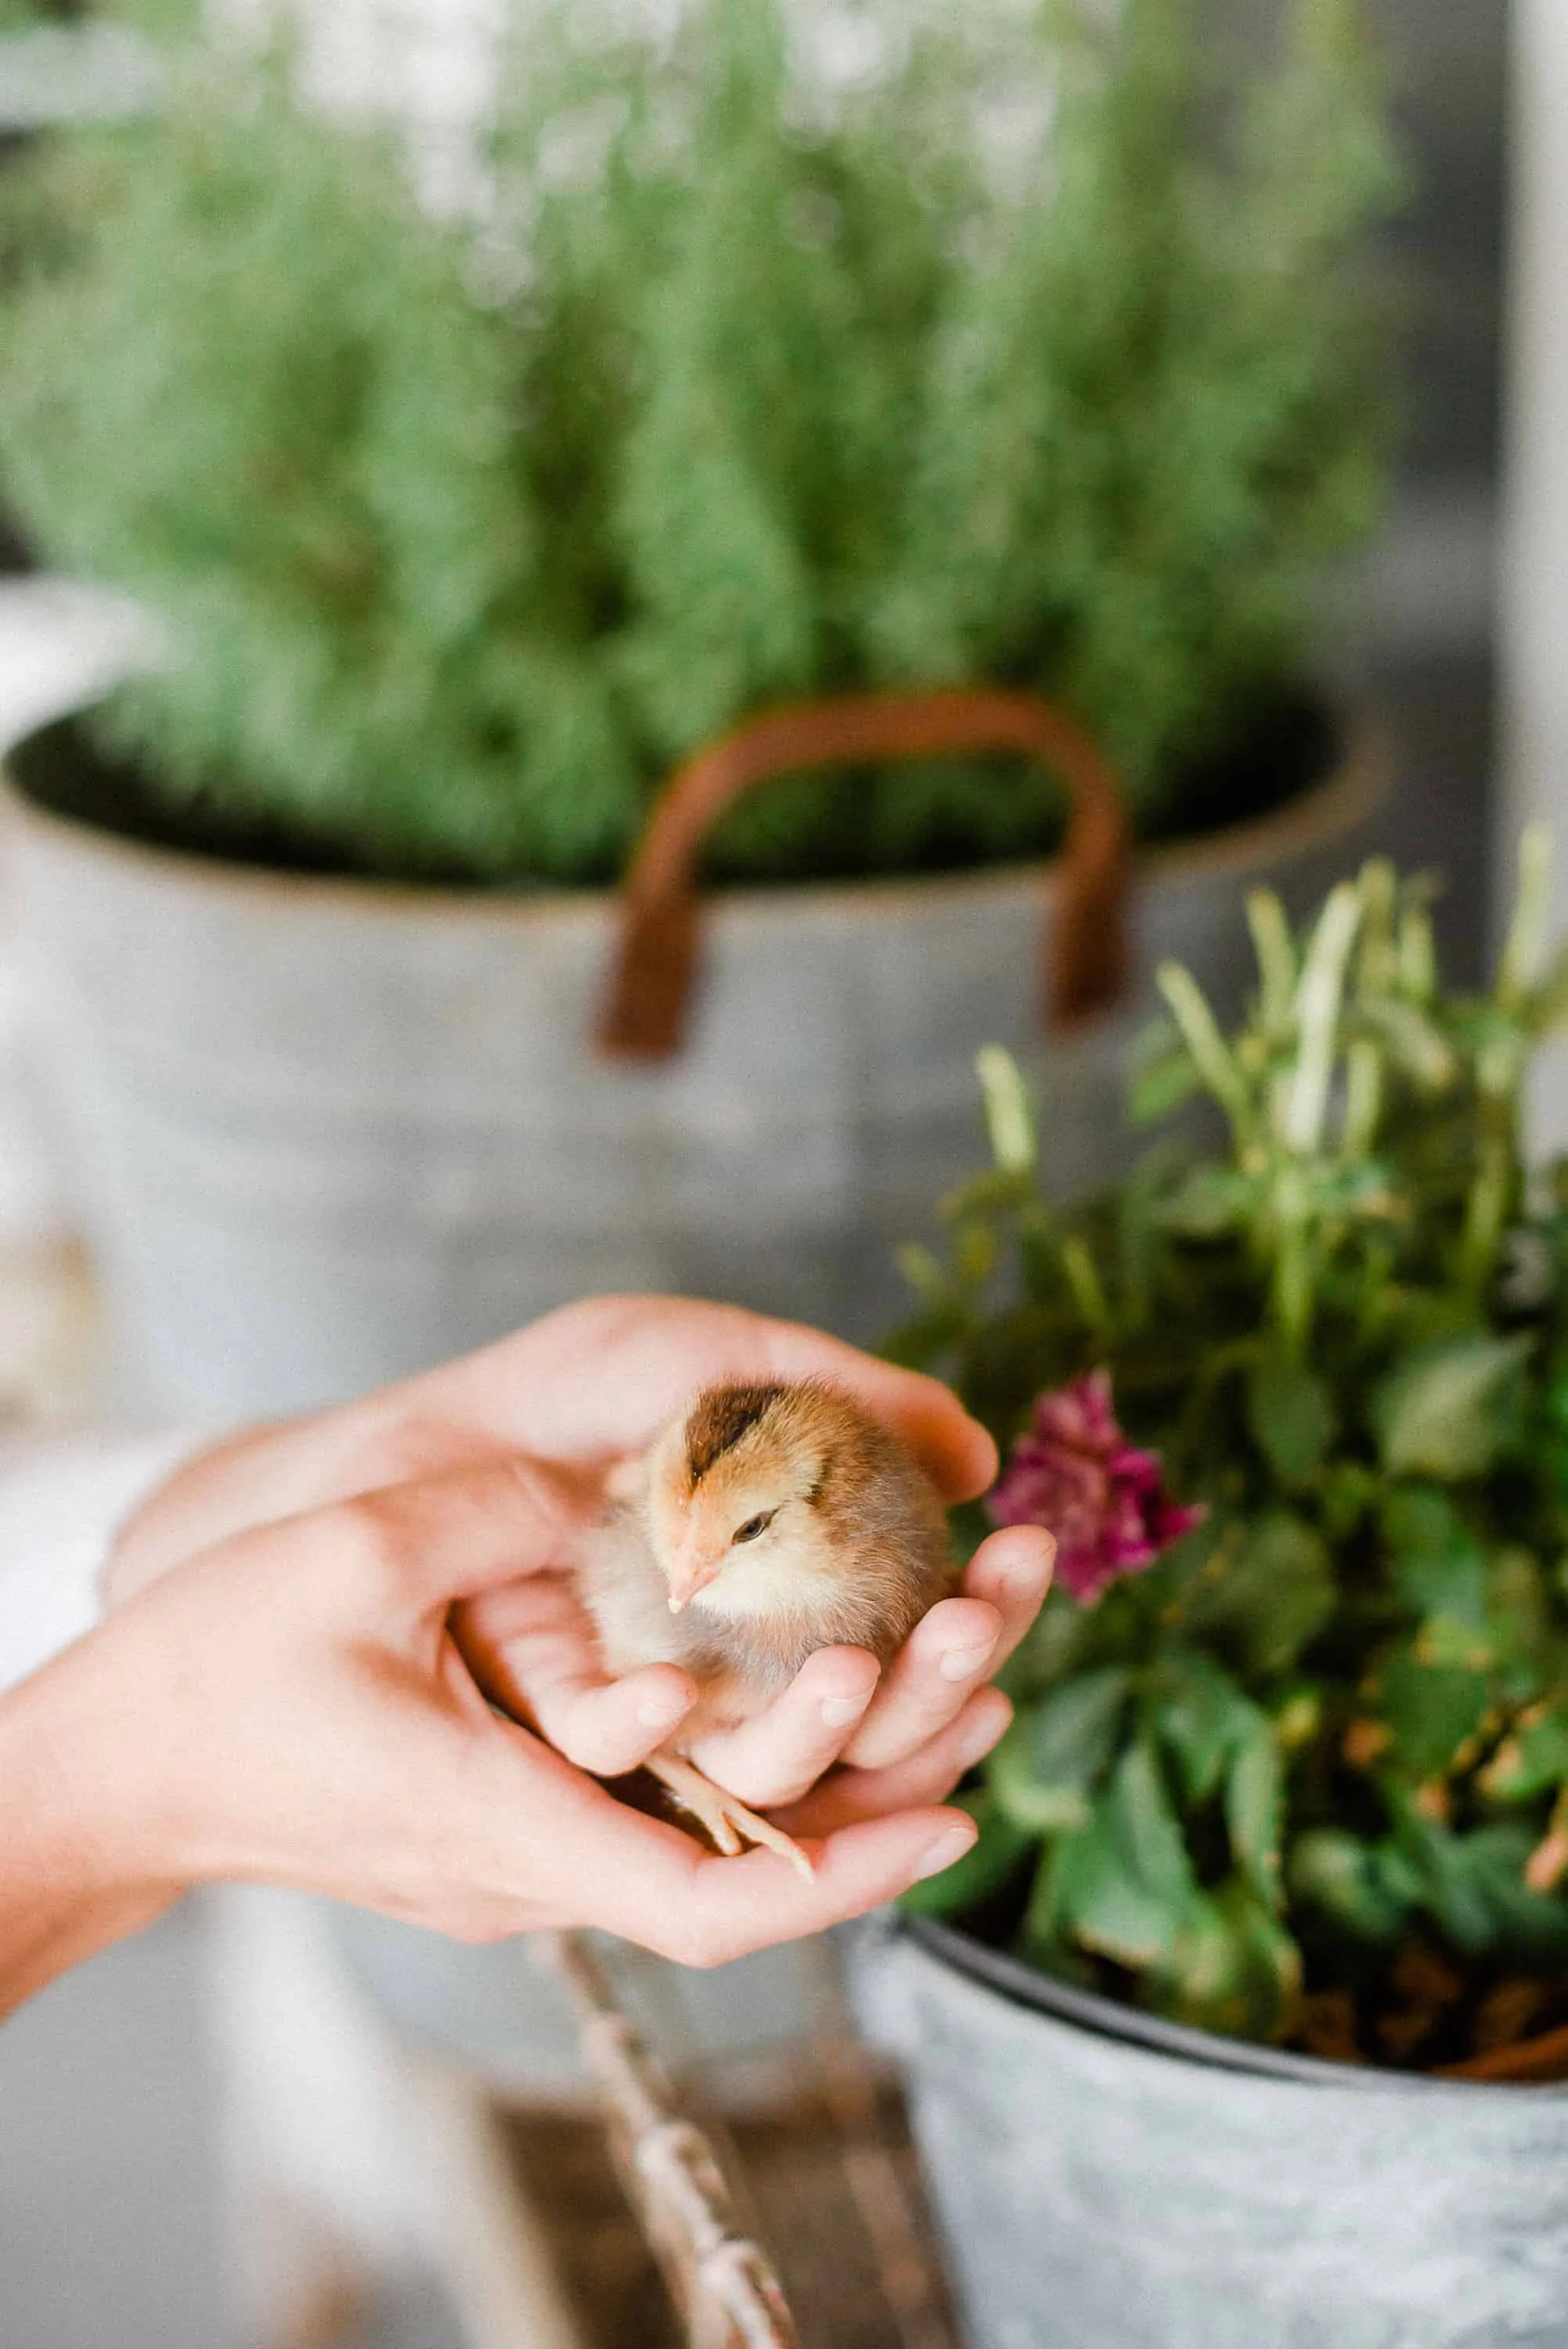 If you plan on raising backyard chickens, chances are, you’ll start with chicks. Here is everything you need to know to begin your backyard chicken journey – starting with raising chicks!